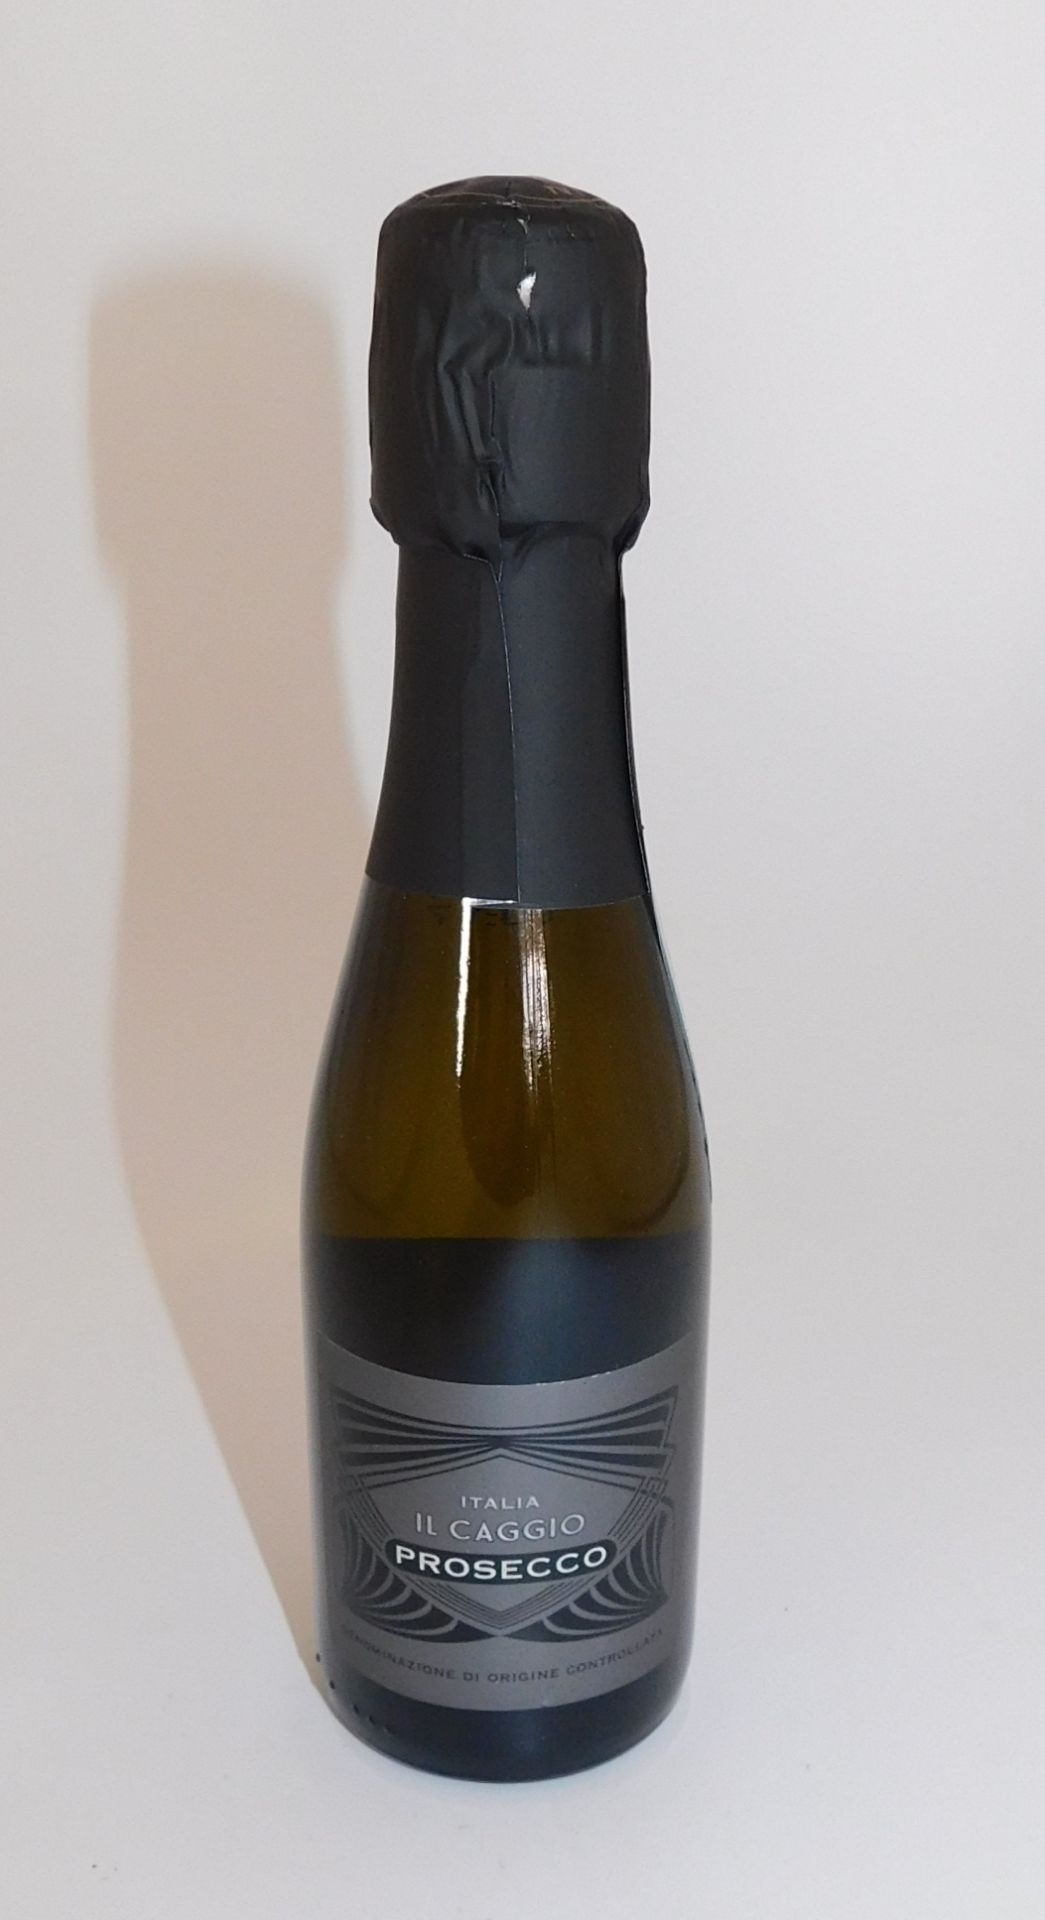 48 Bottles of Il Caggio Prosecco, 200ml (Located Stockport – See General Notes for More Details)